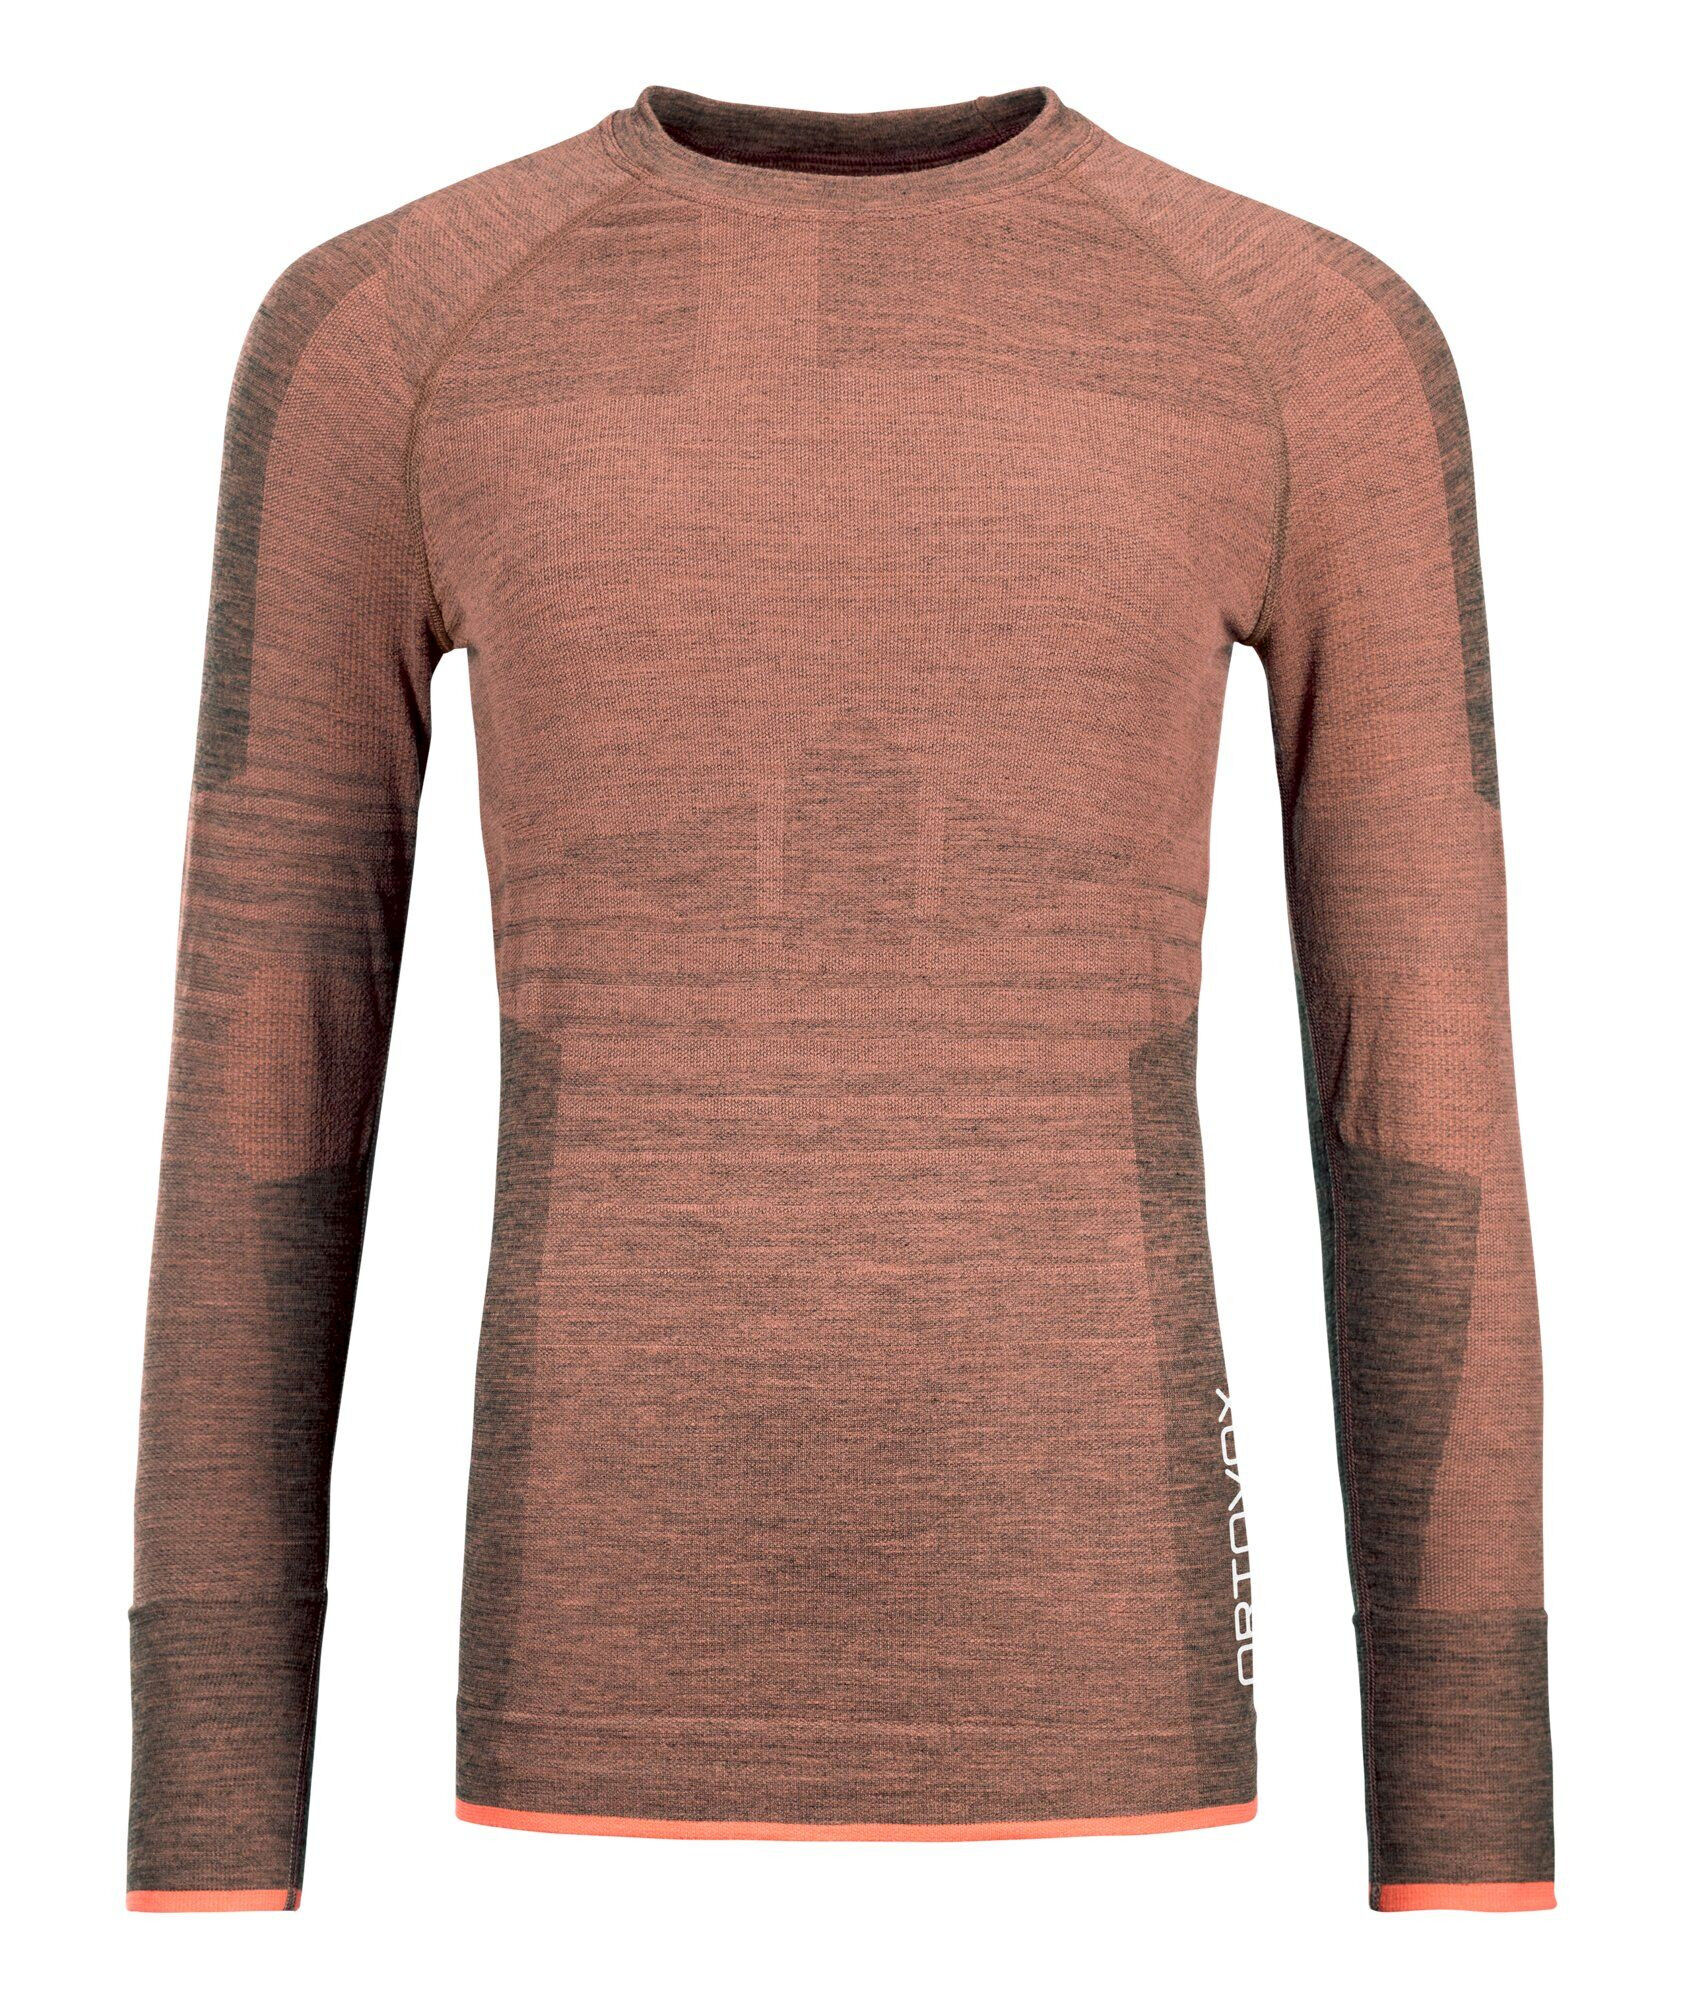 Ortovox 230 Competition Long Sleeve - Intimo - Donna